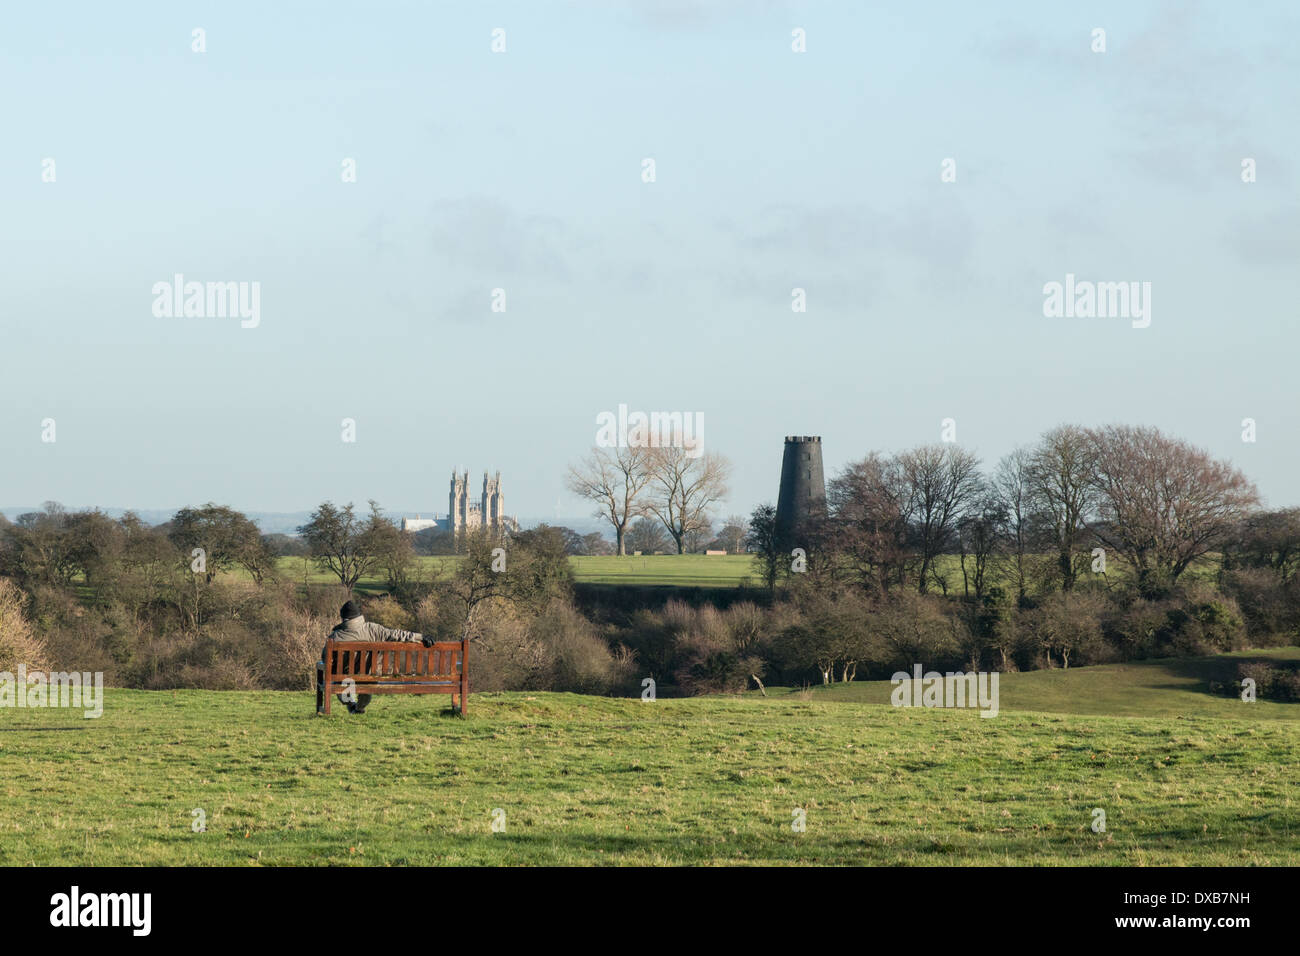 Man sitting on a seat looking towards Beverley town on Beverley Westwood, East Yorkshire UK Stock Photo